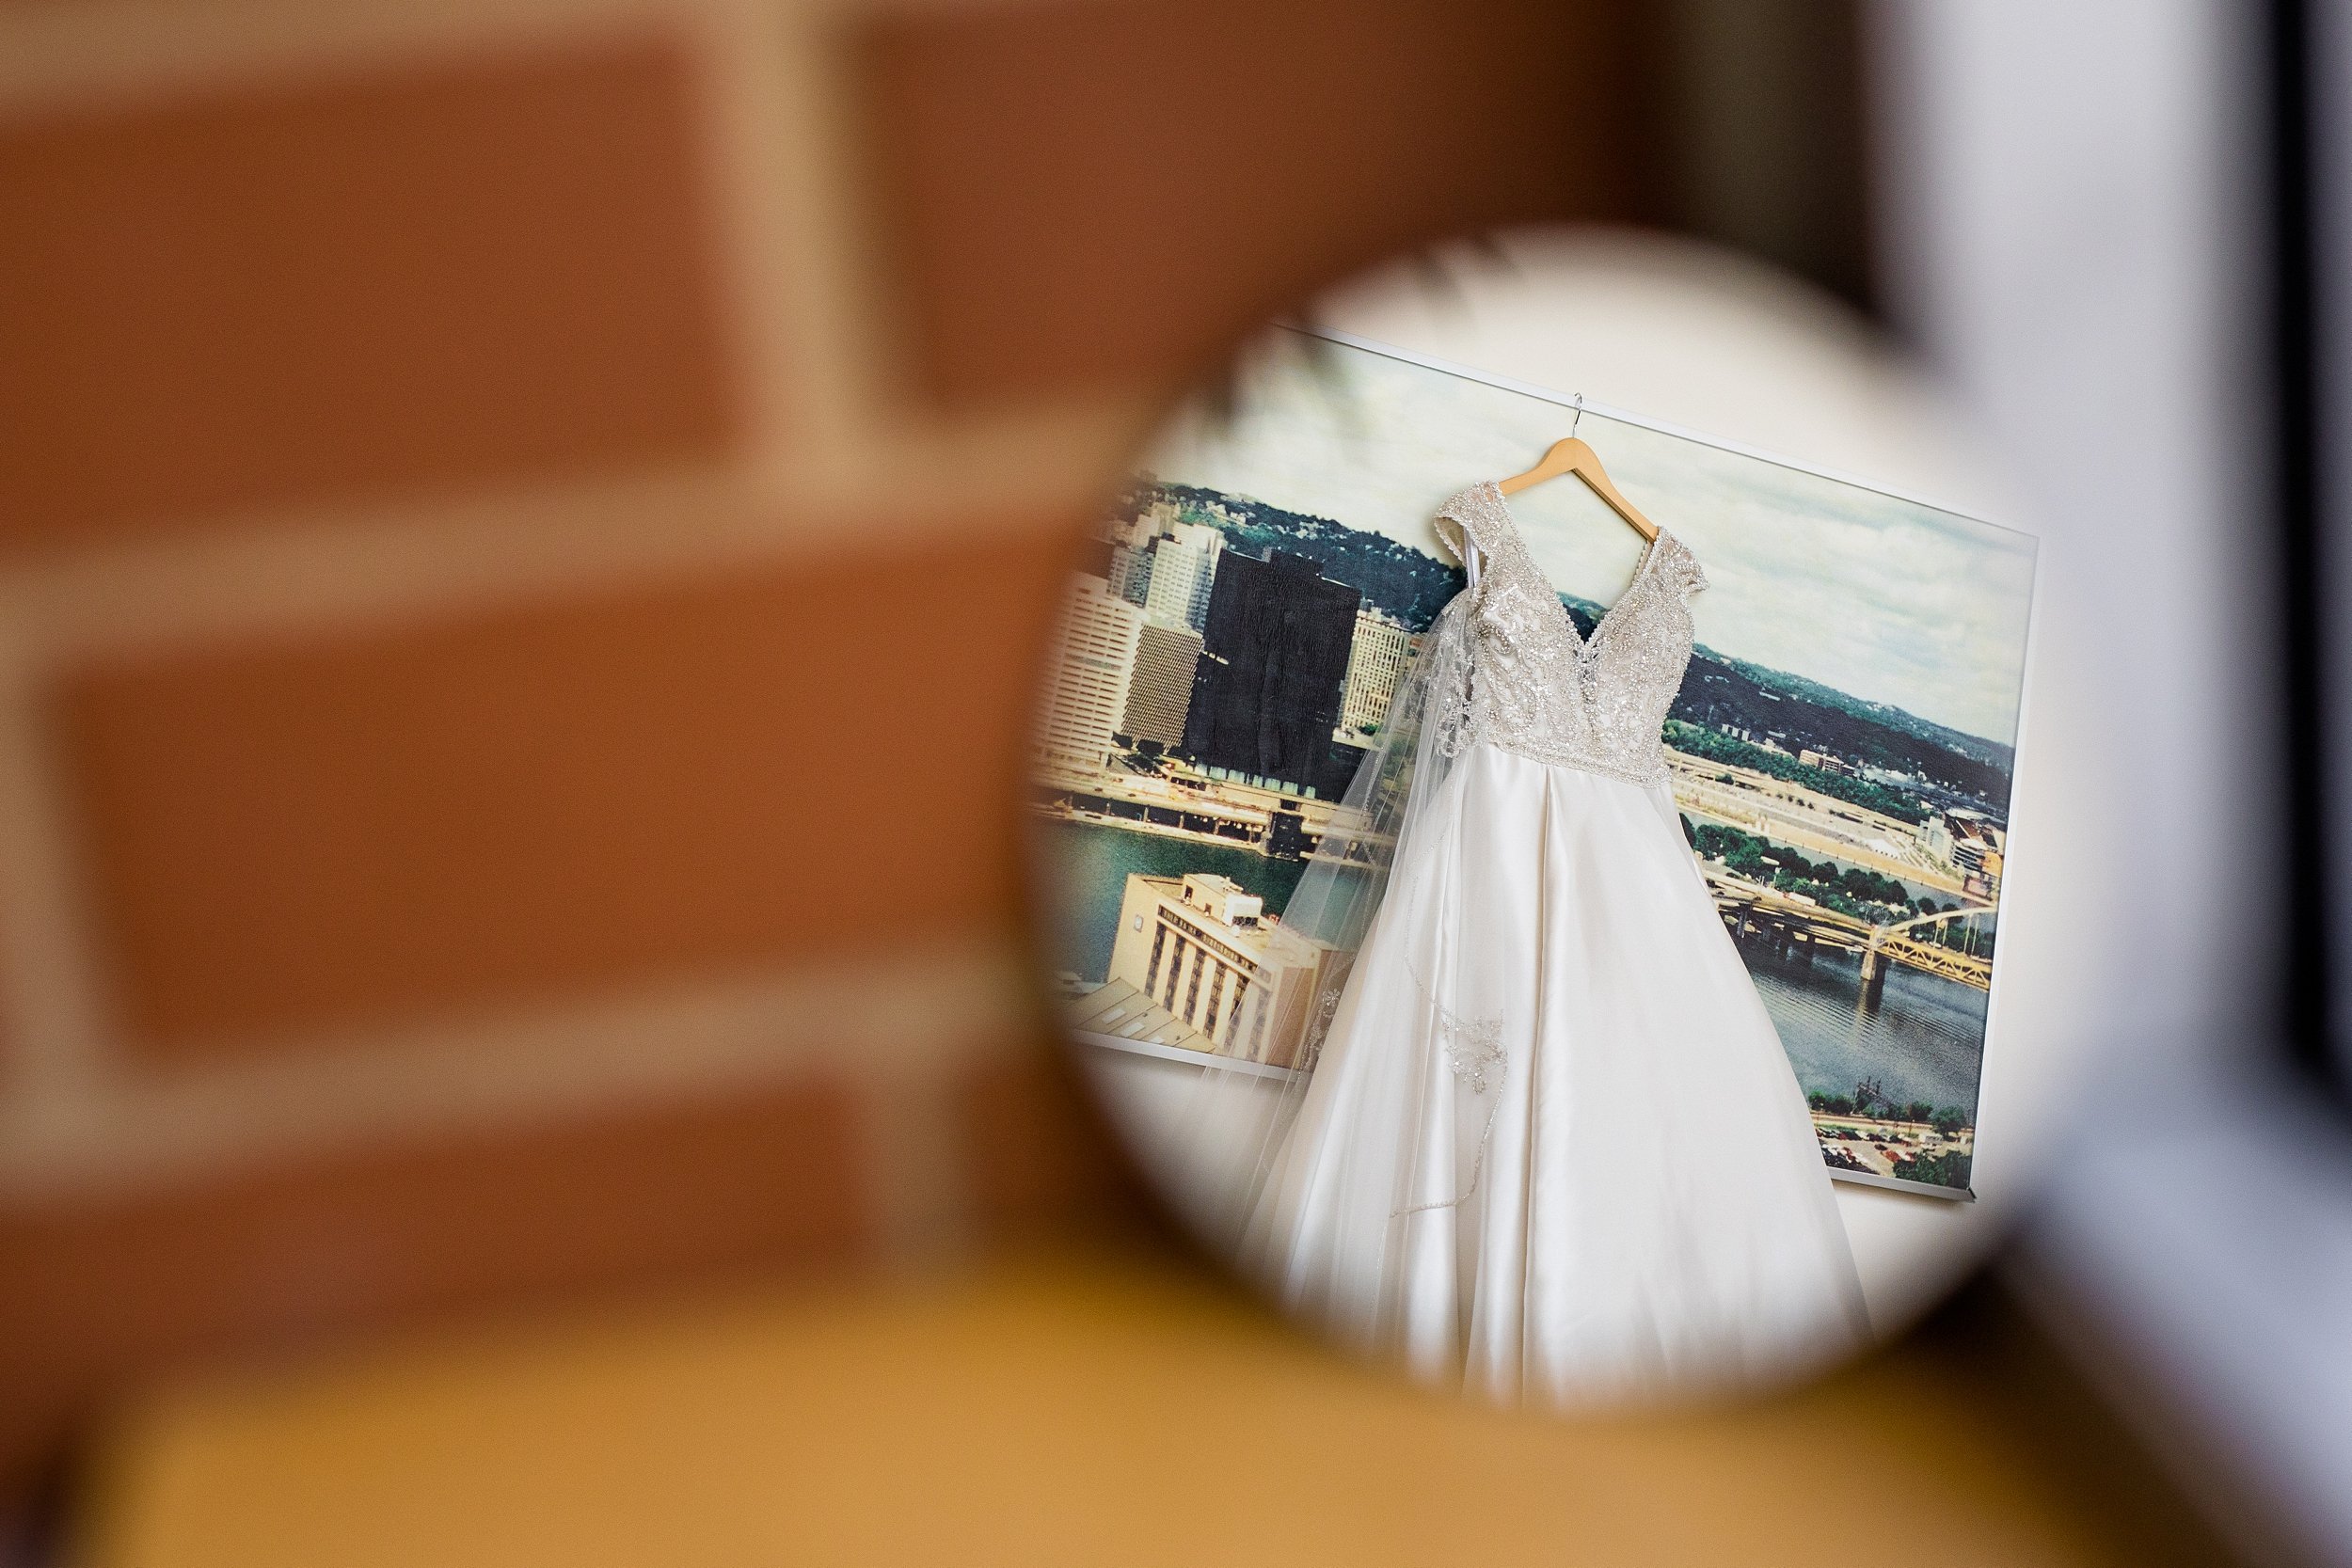  This image was created using a $1.25 mirror from the Dollar Tree… this was the first time I used this little trick to add a bit of visual interest to a detail shot, and I love how it turned out! 